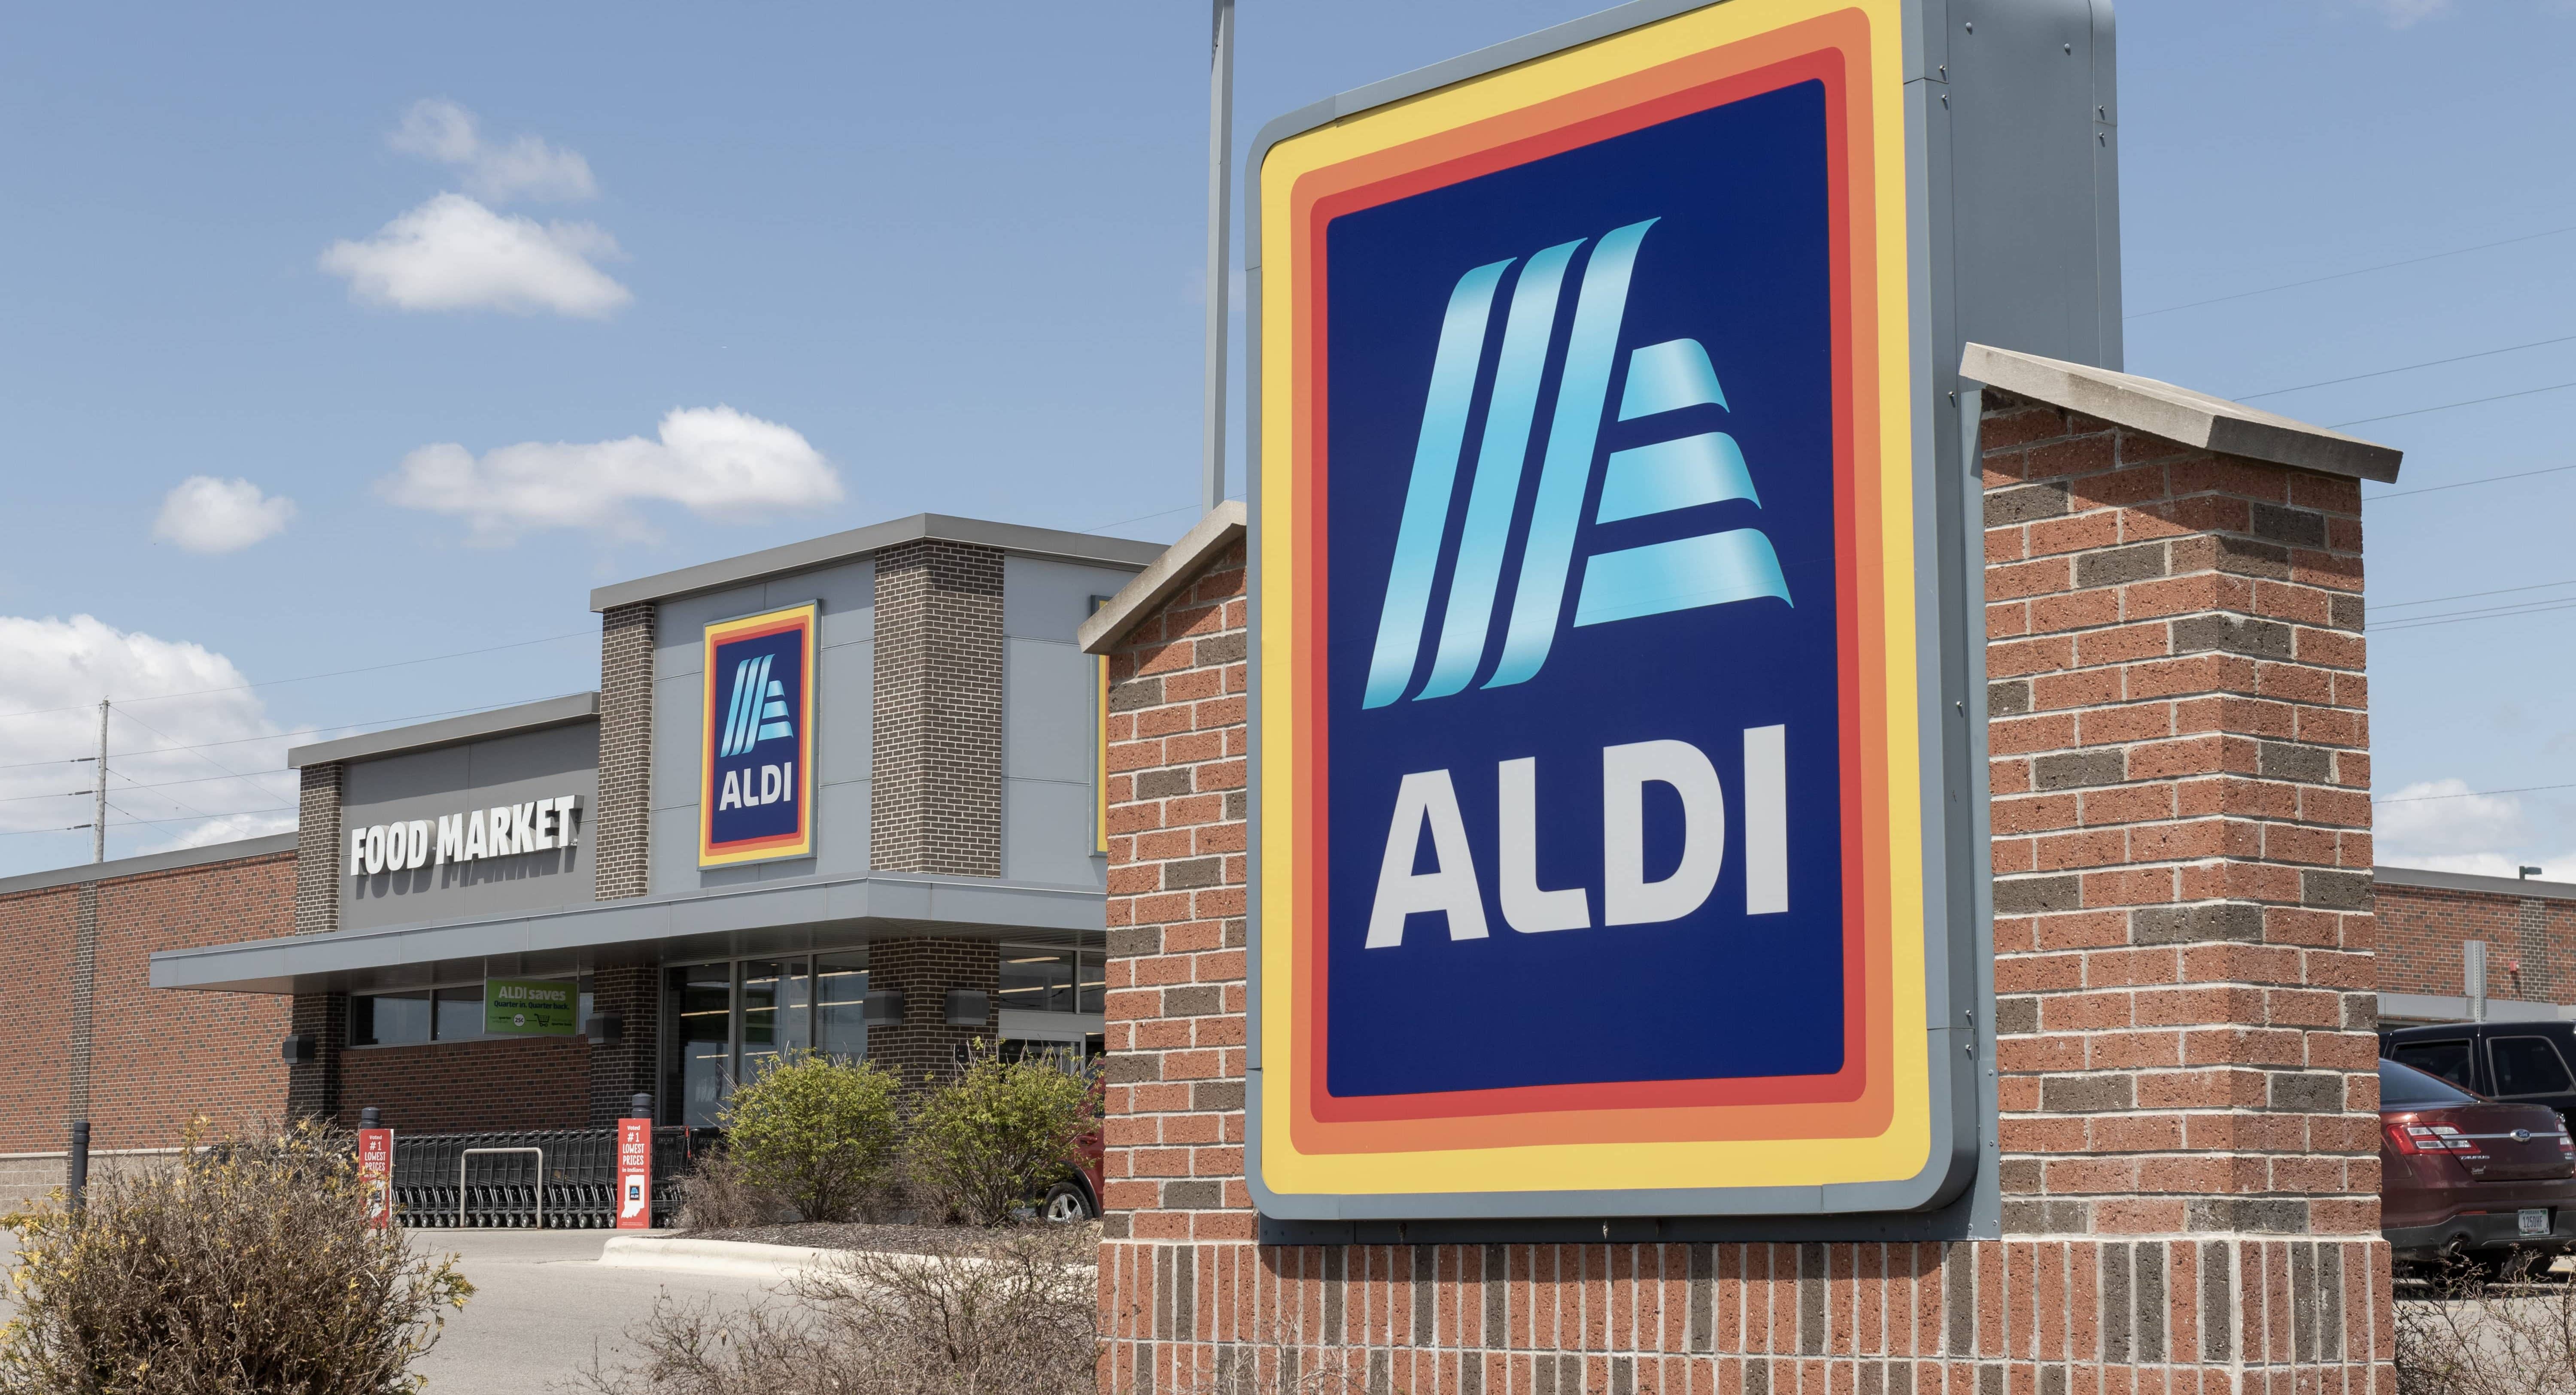 aldi-discount-supermarket-aldi-sells-a-range-of-grocery-items-including-produce-meat-and-dairy-at-discount-prices